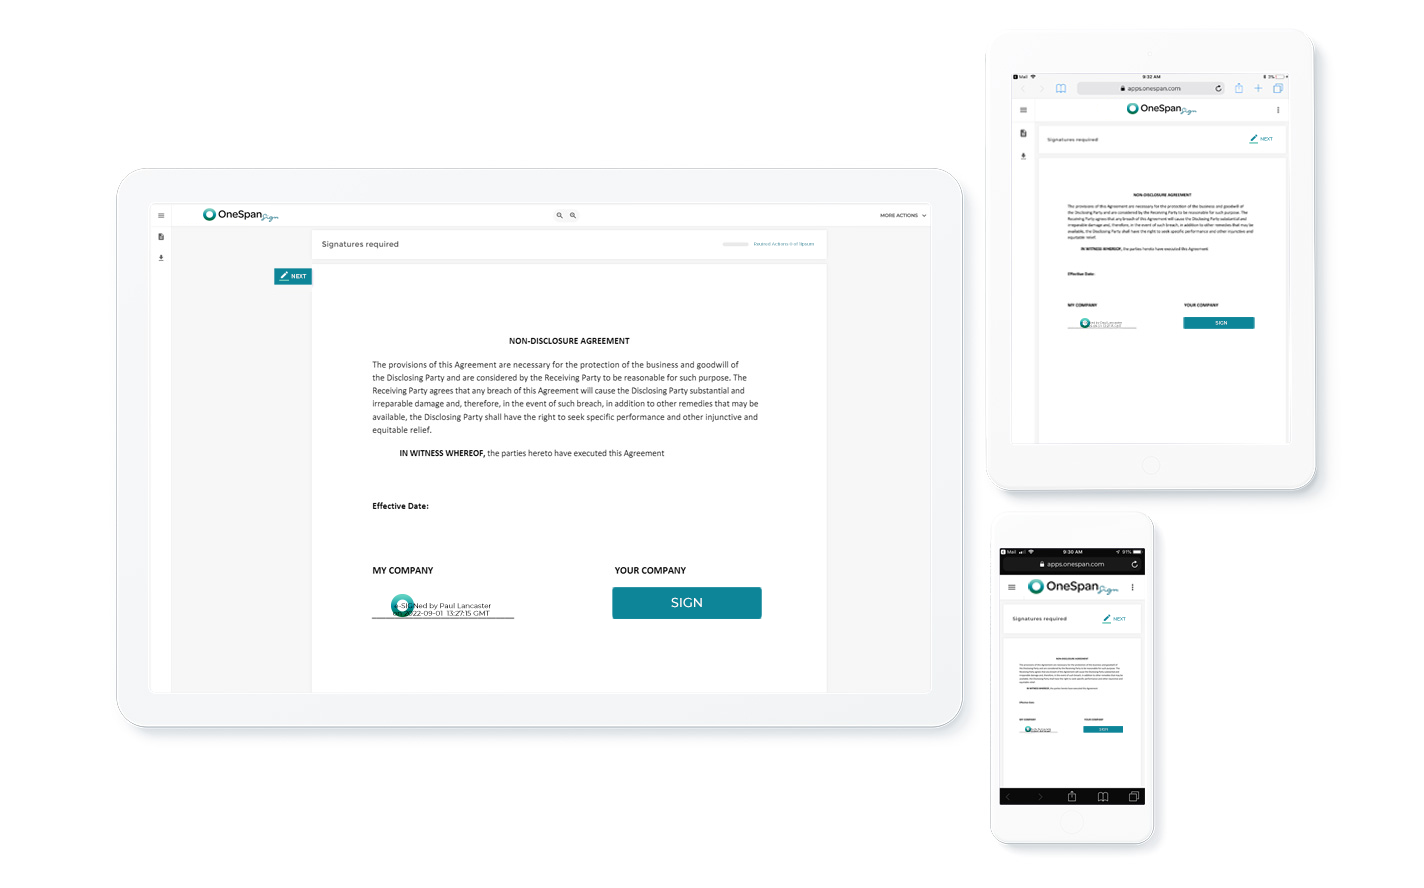 The signing process is intuitive and easy for your signers. OneSpan Sign offers an optimized signing experience so your signers can sign anywhere, anytime, and across multiple devices.